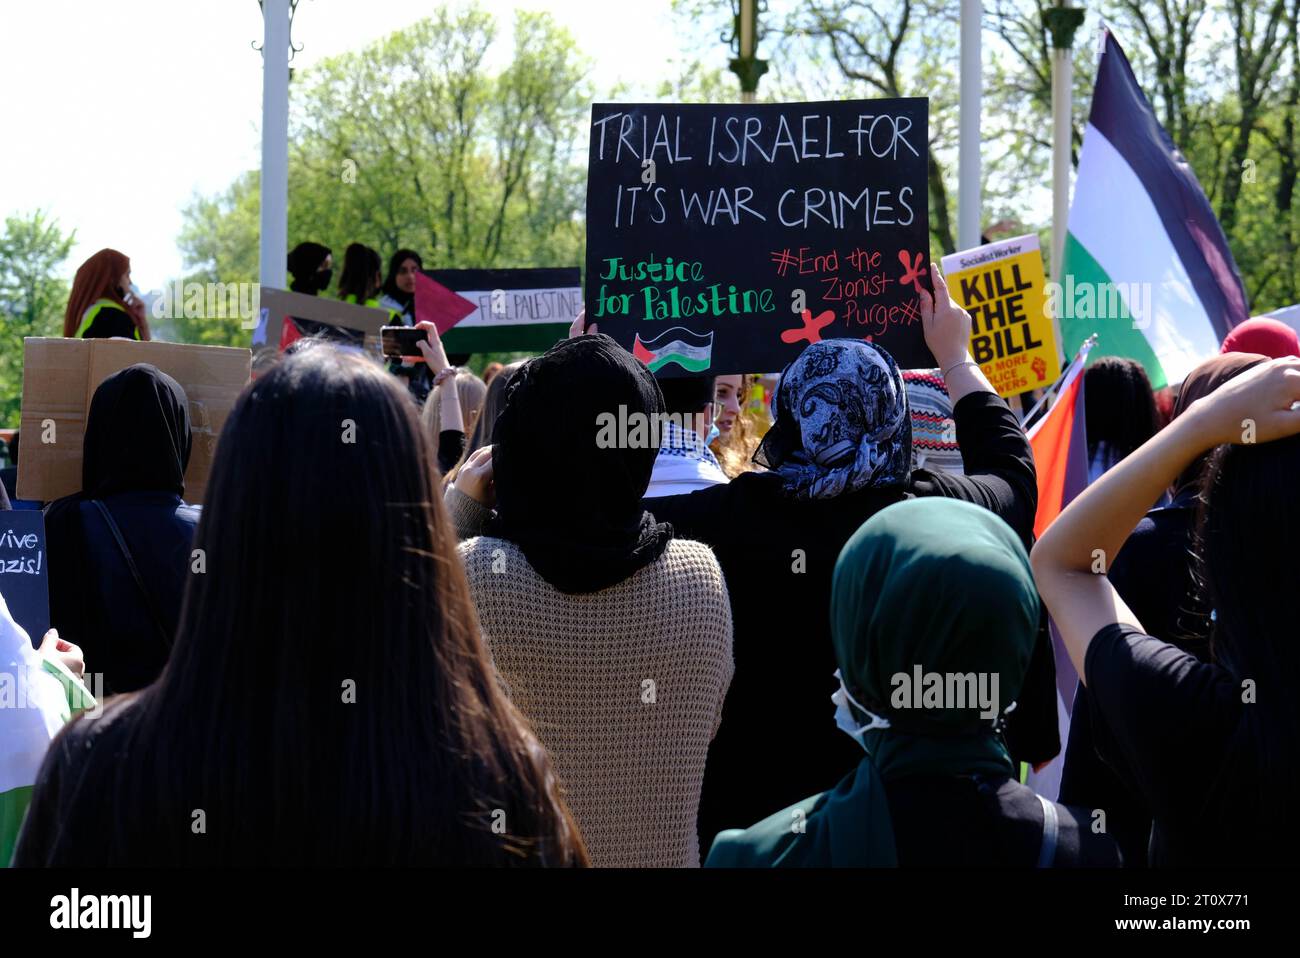 Hanley Park, Stoke on Trent, UK. 29th May 2021. Protesters march in Stoke on Trent demanding Freedom for Palestine and the end of oppression. Stock Photo